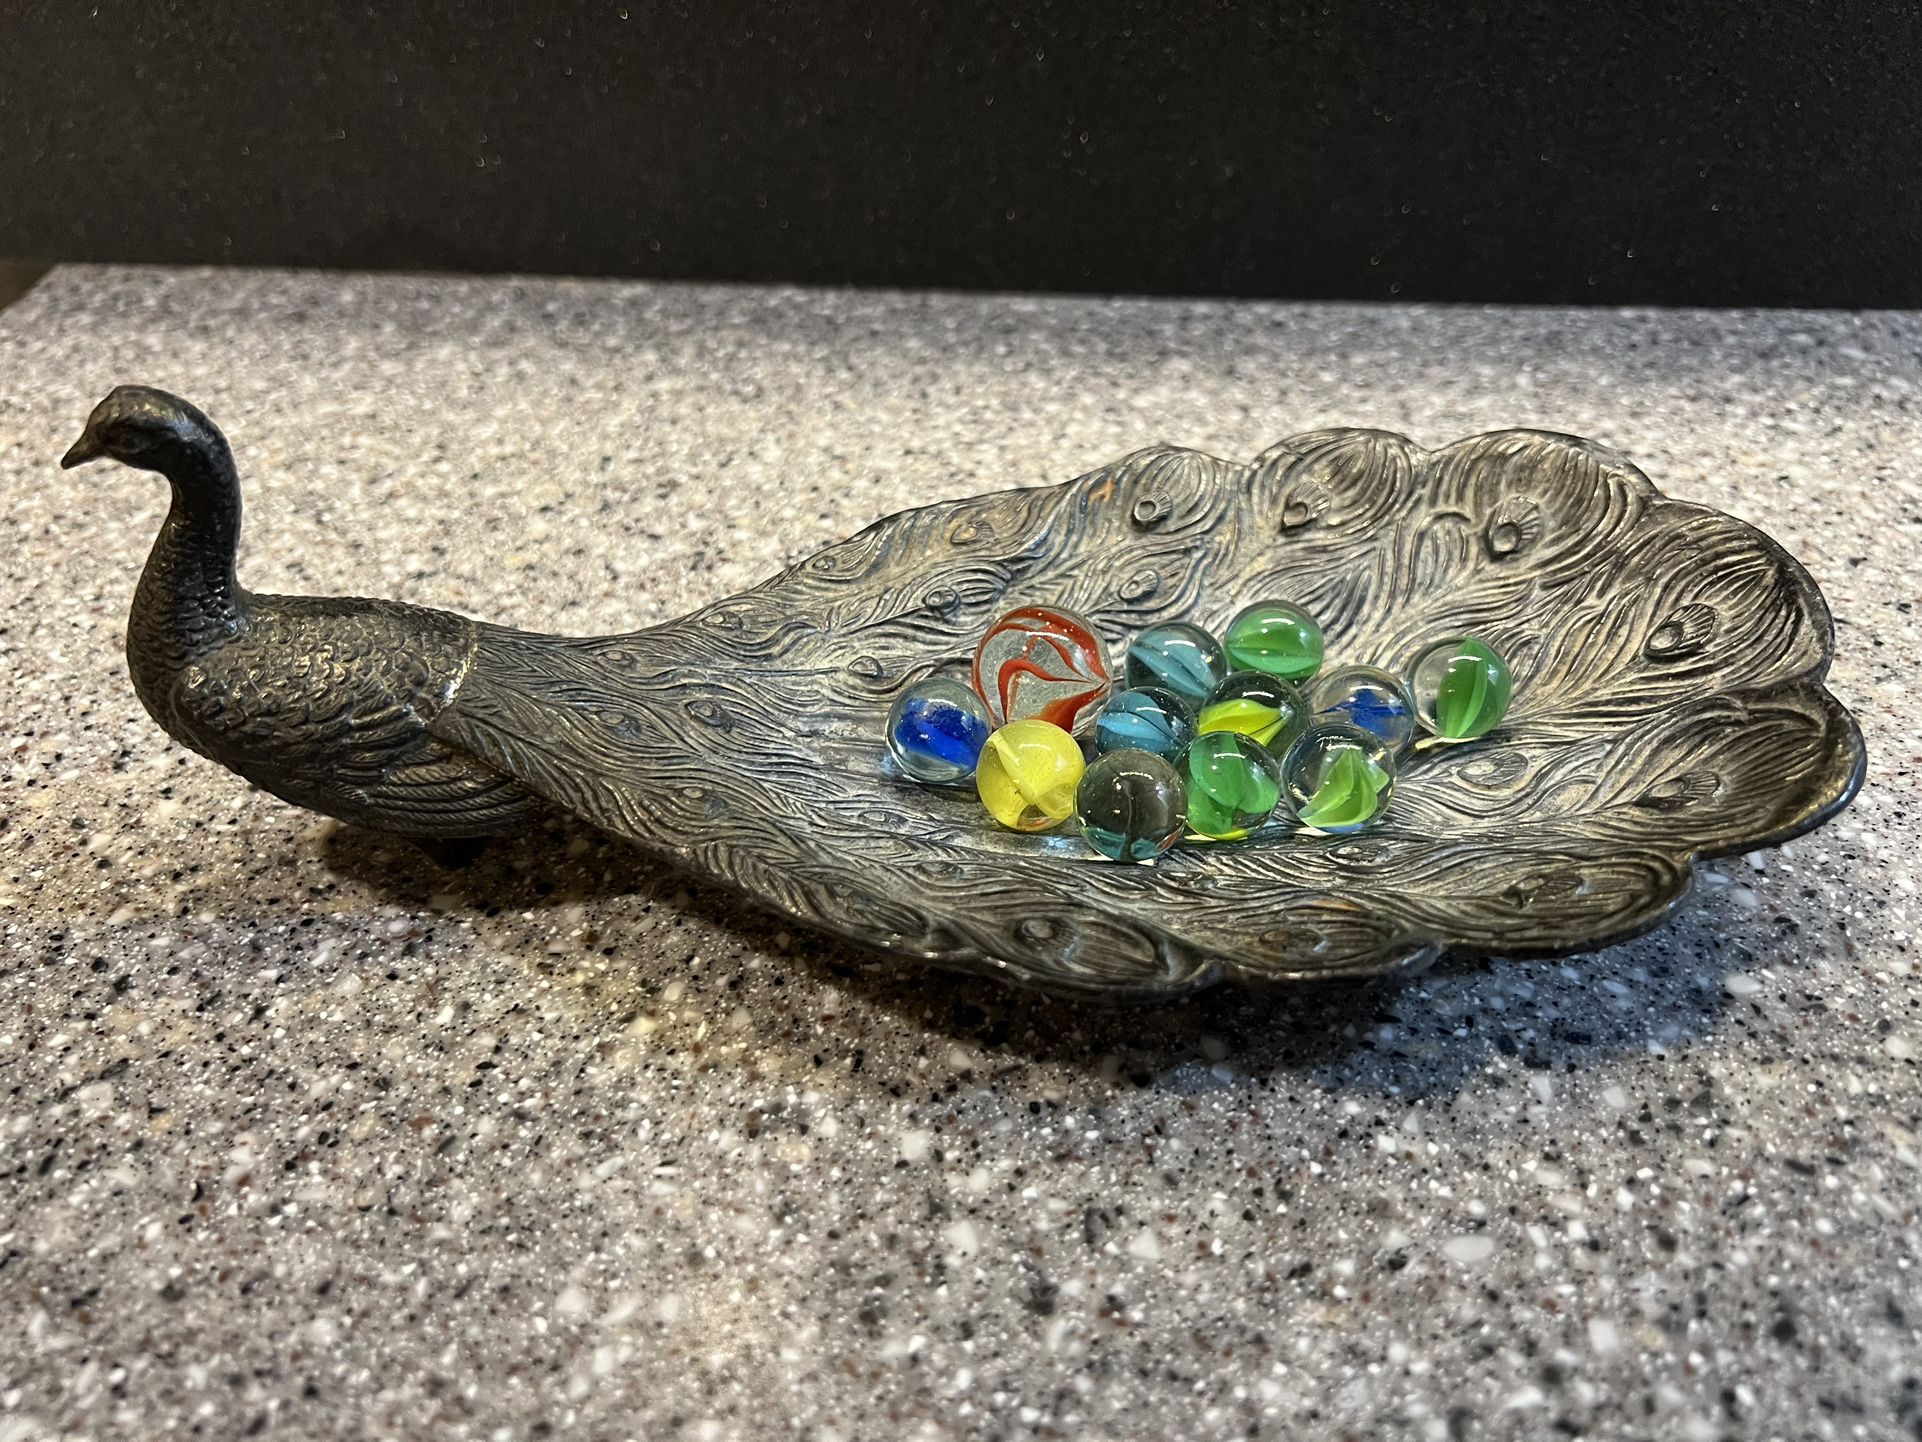 Vintage -Cast Metal Peacock Figurine - Jewelry Tray /Calling Card Dish/ Soap Dish Etc…